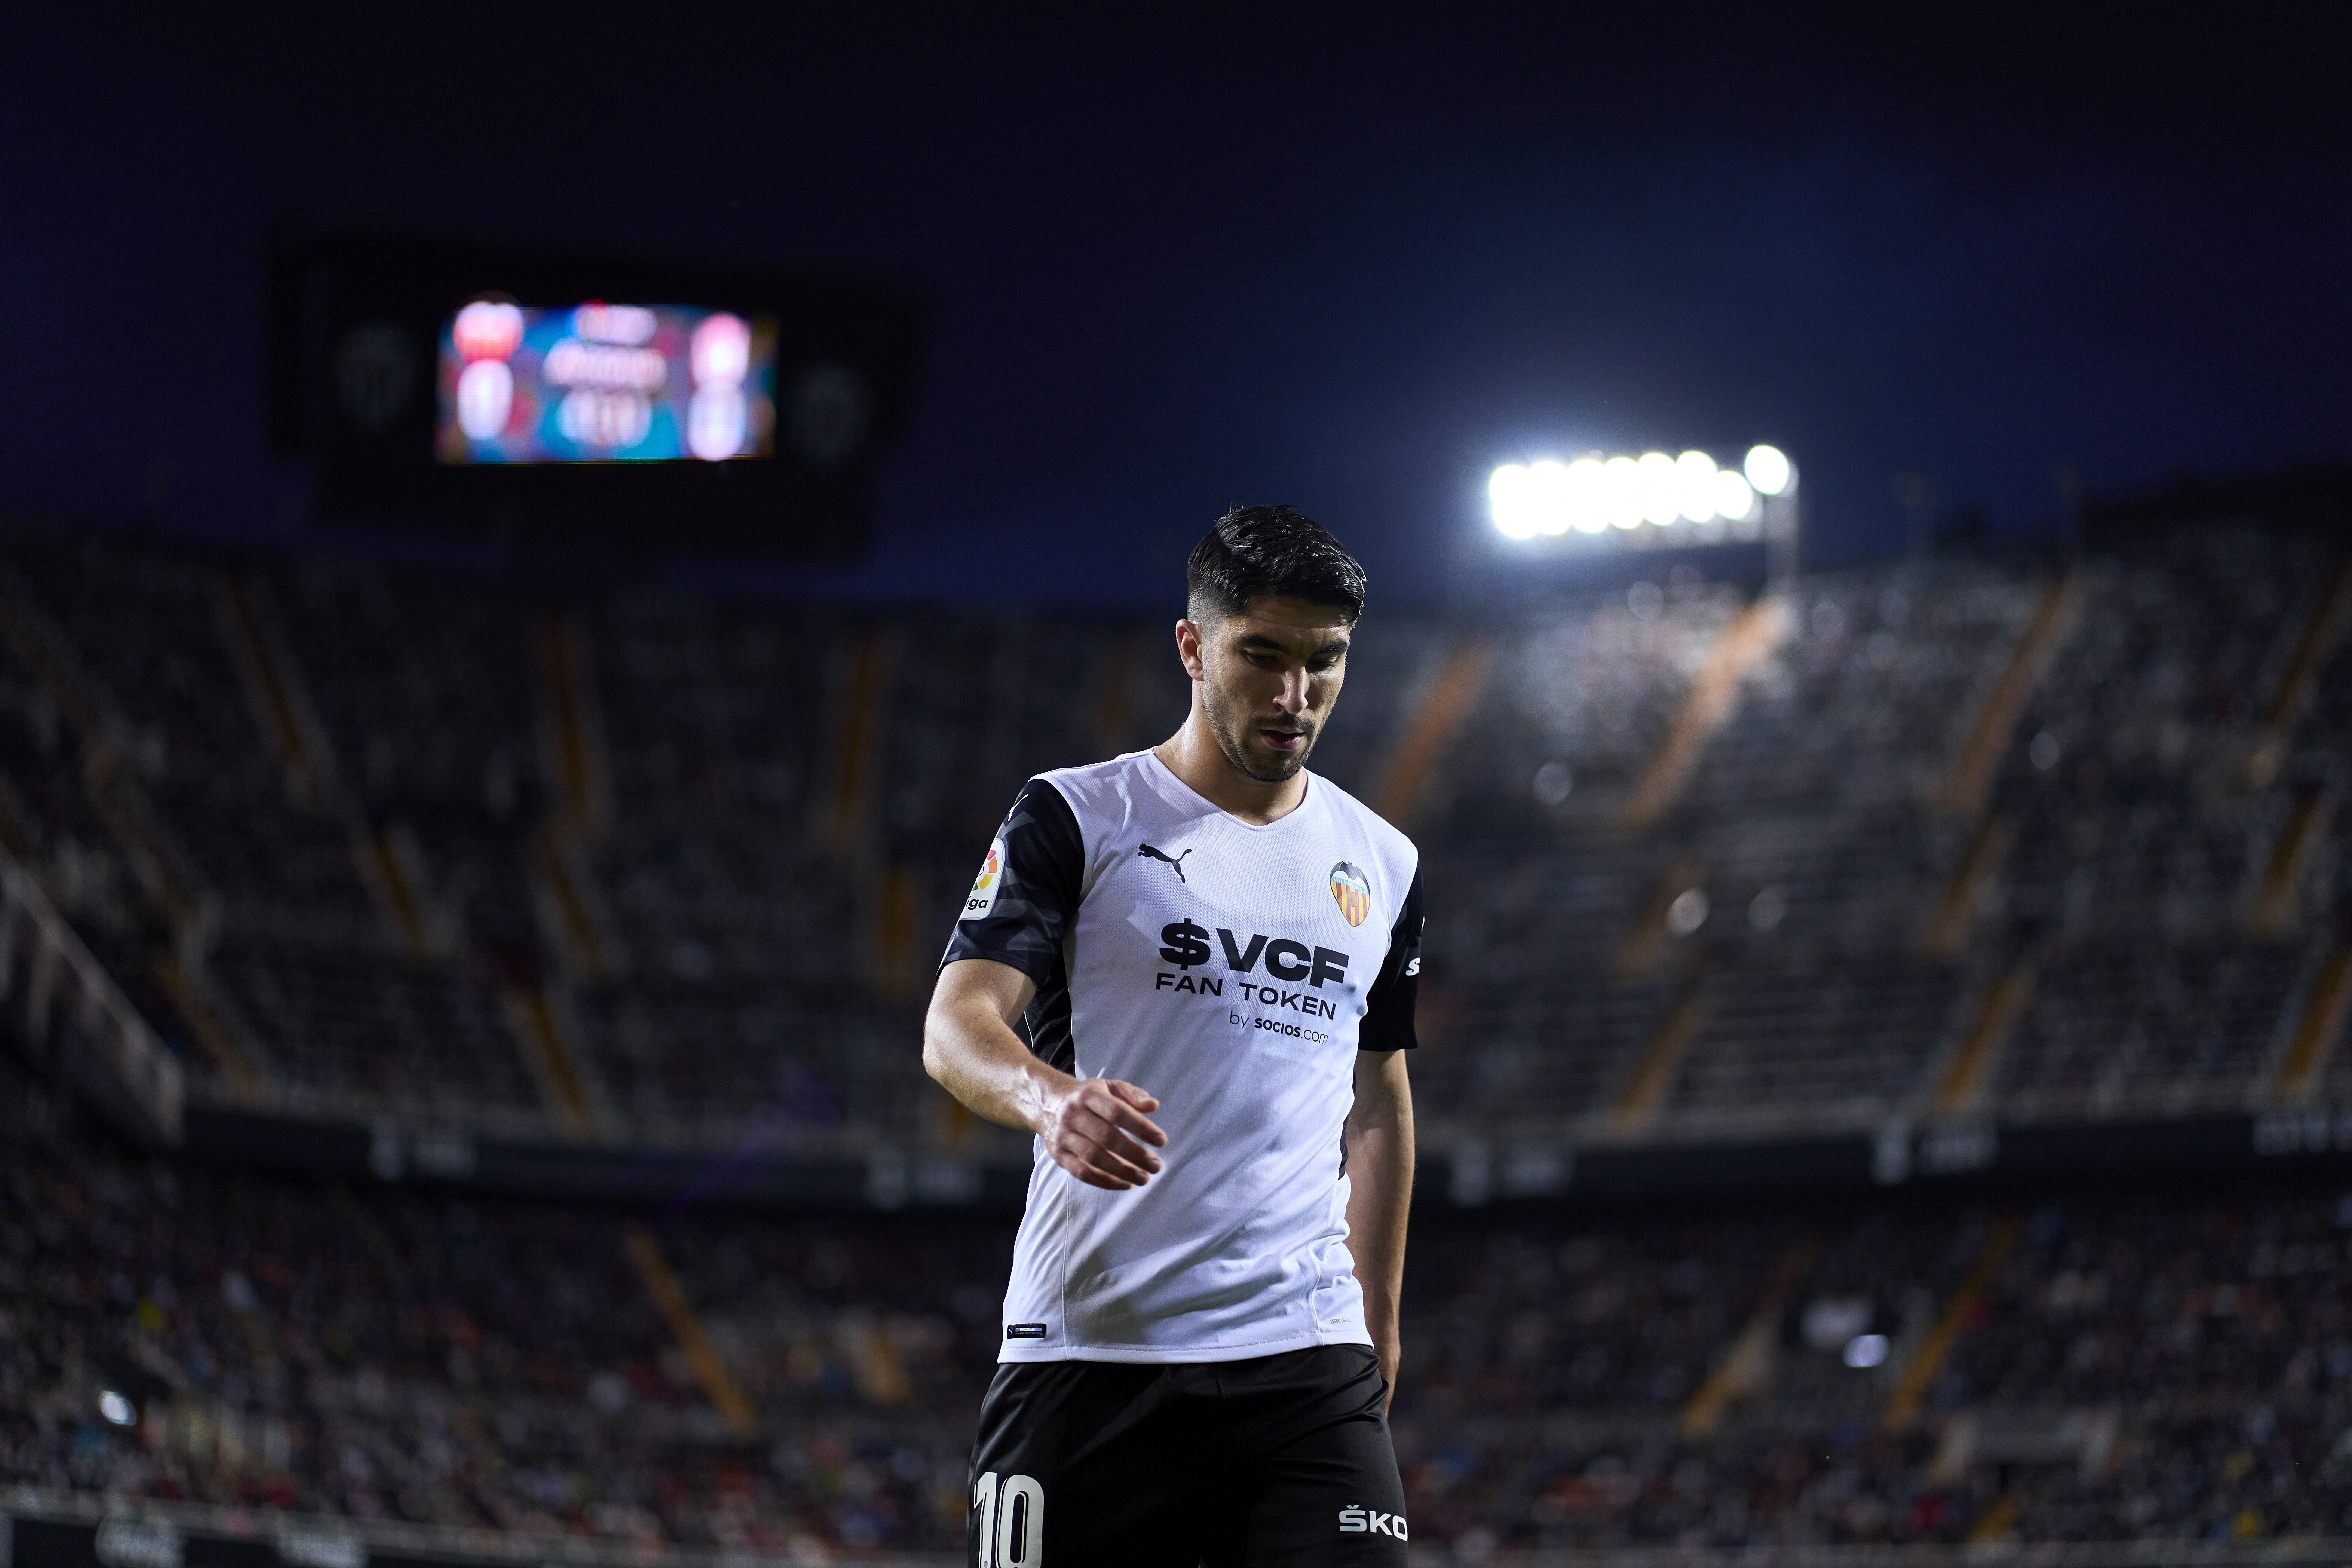 Report makes bold claim about West Ham potentially signing £30 million Valencia ace Carlos Soler